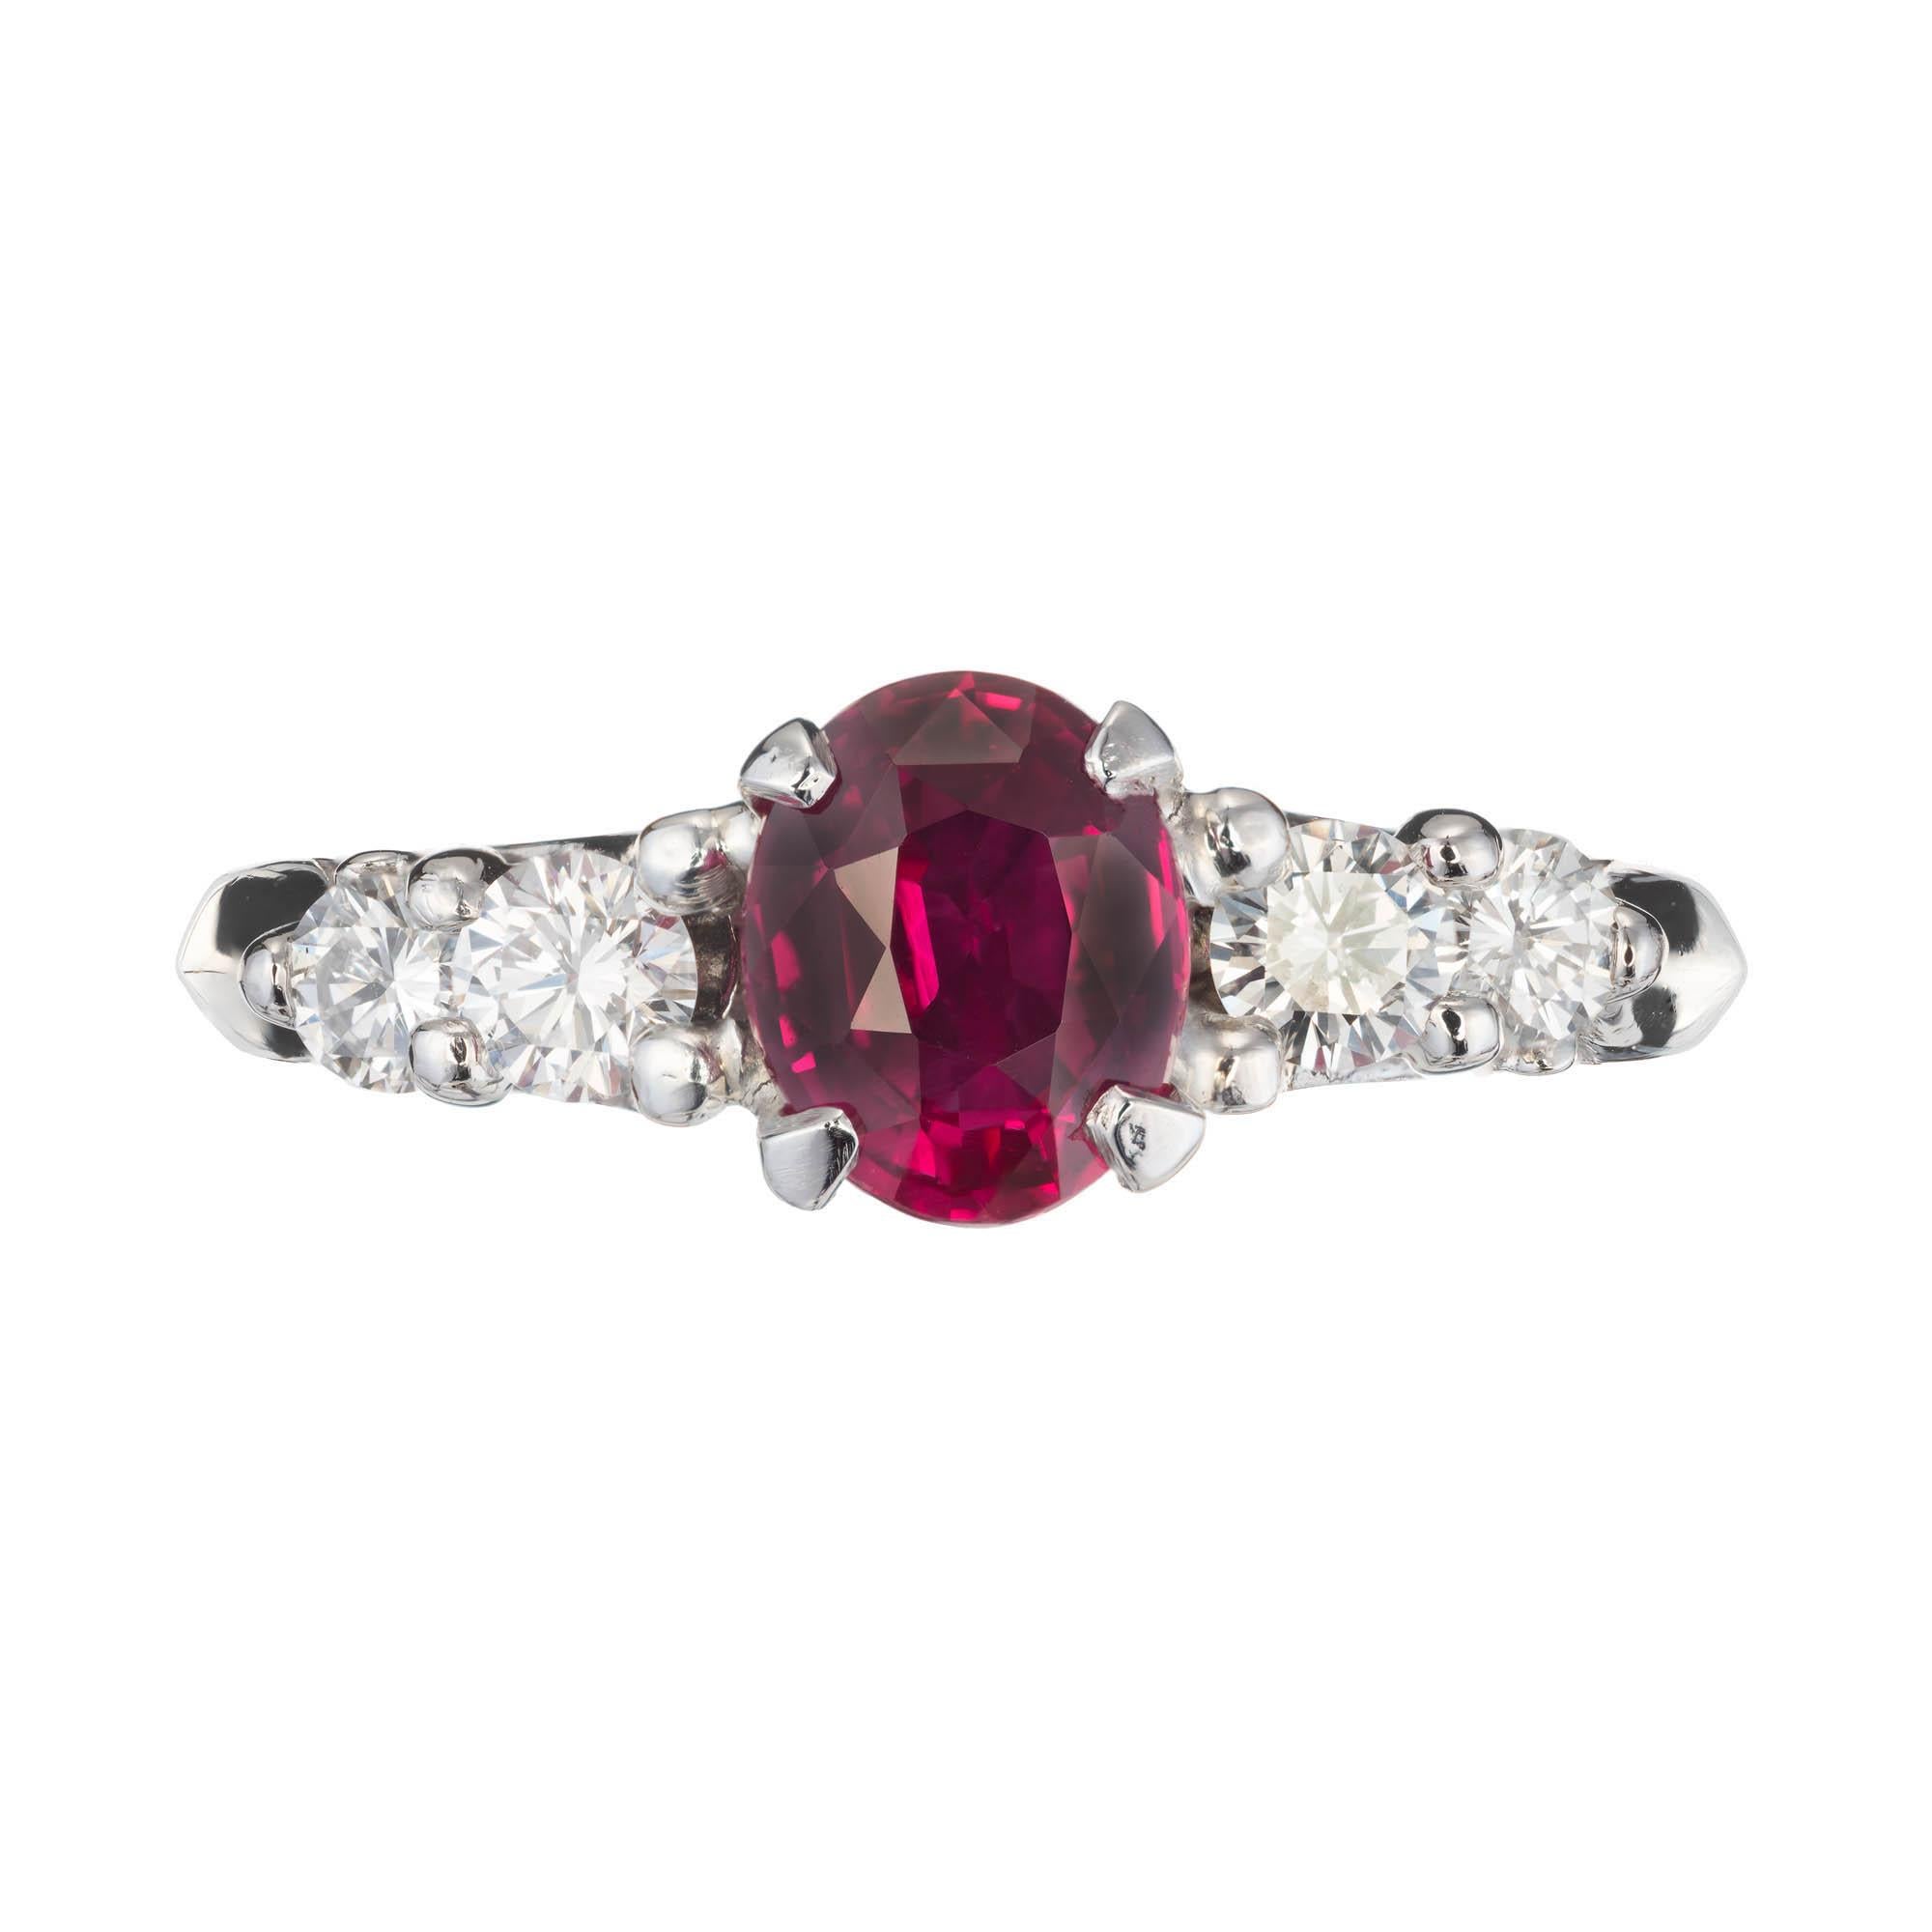 Peter Suchy ruby and diamond engagement ring. GIA certified natural ruby center stone, with two round accent diamonds on each side of the platinum setting. Hand crafted in the Peter Suchy Workshop. 

1 oval red ruby, Approximate 1.35 carats. GIA